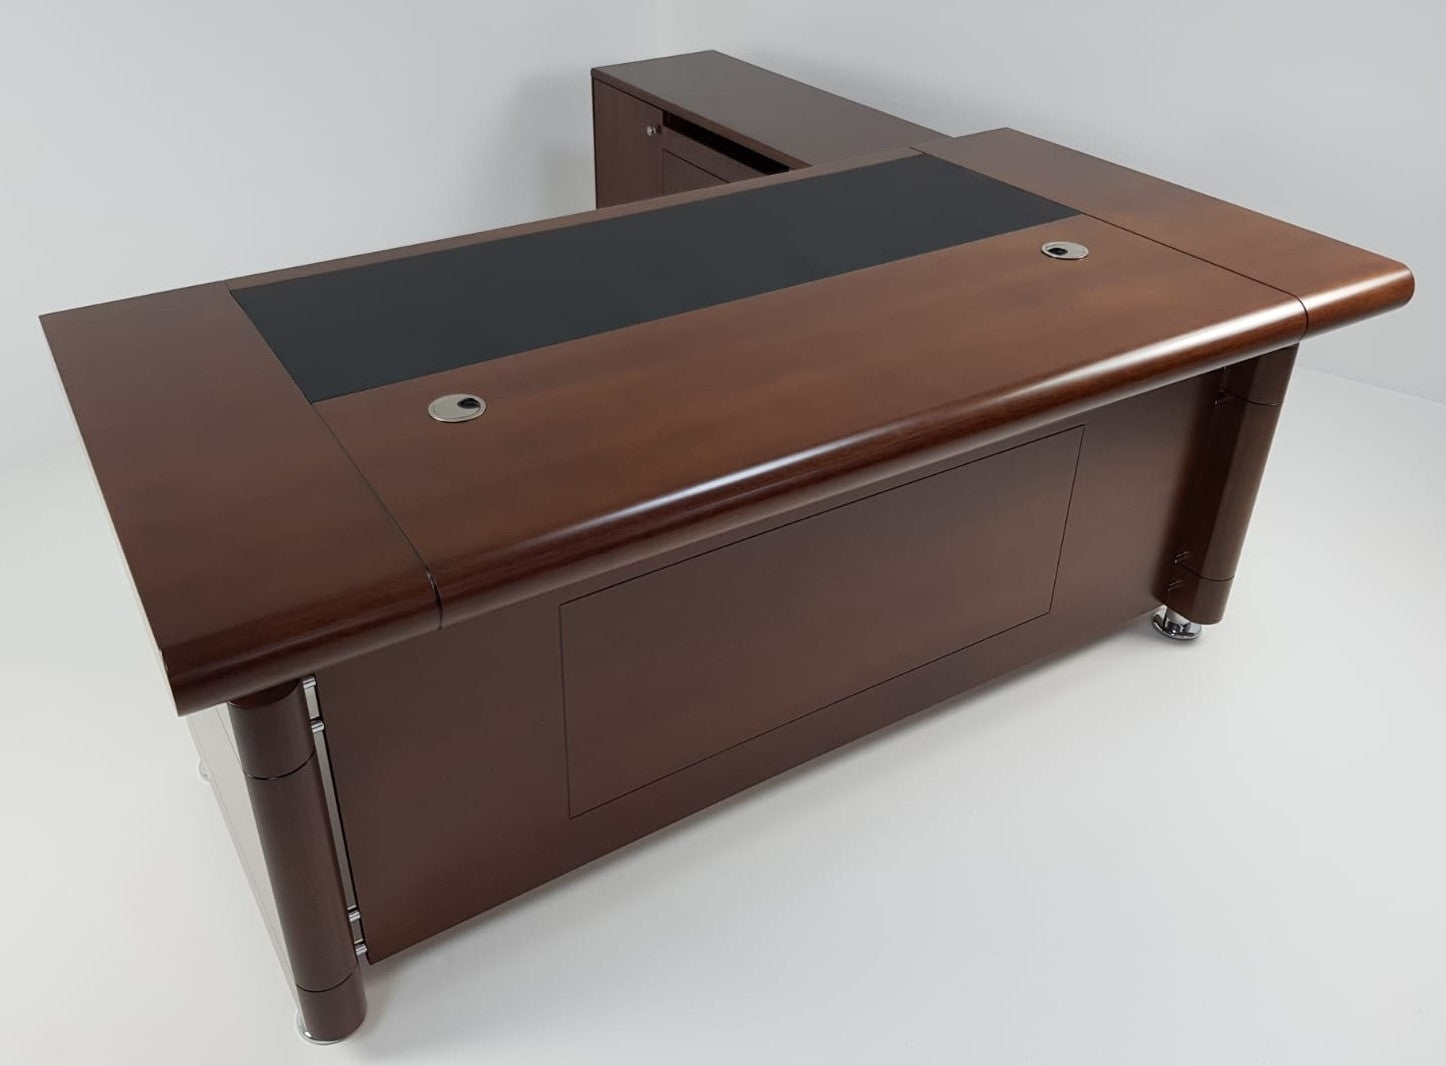 Light Walnut Real Wood Veneer Executive Desk With Roll Top - DES-1861 North Yorkshire